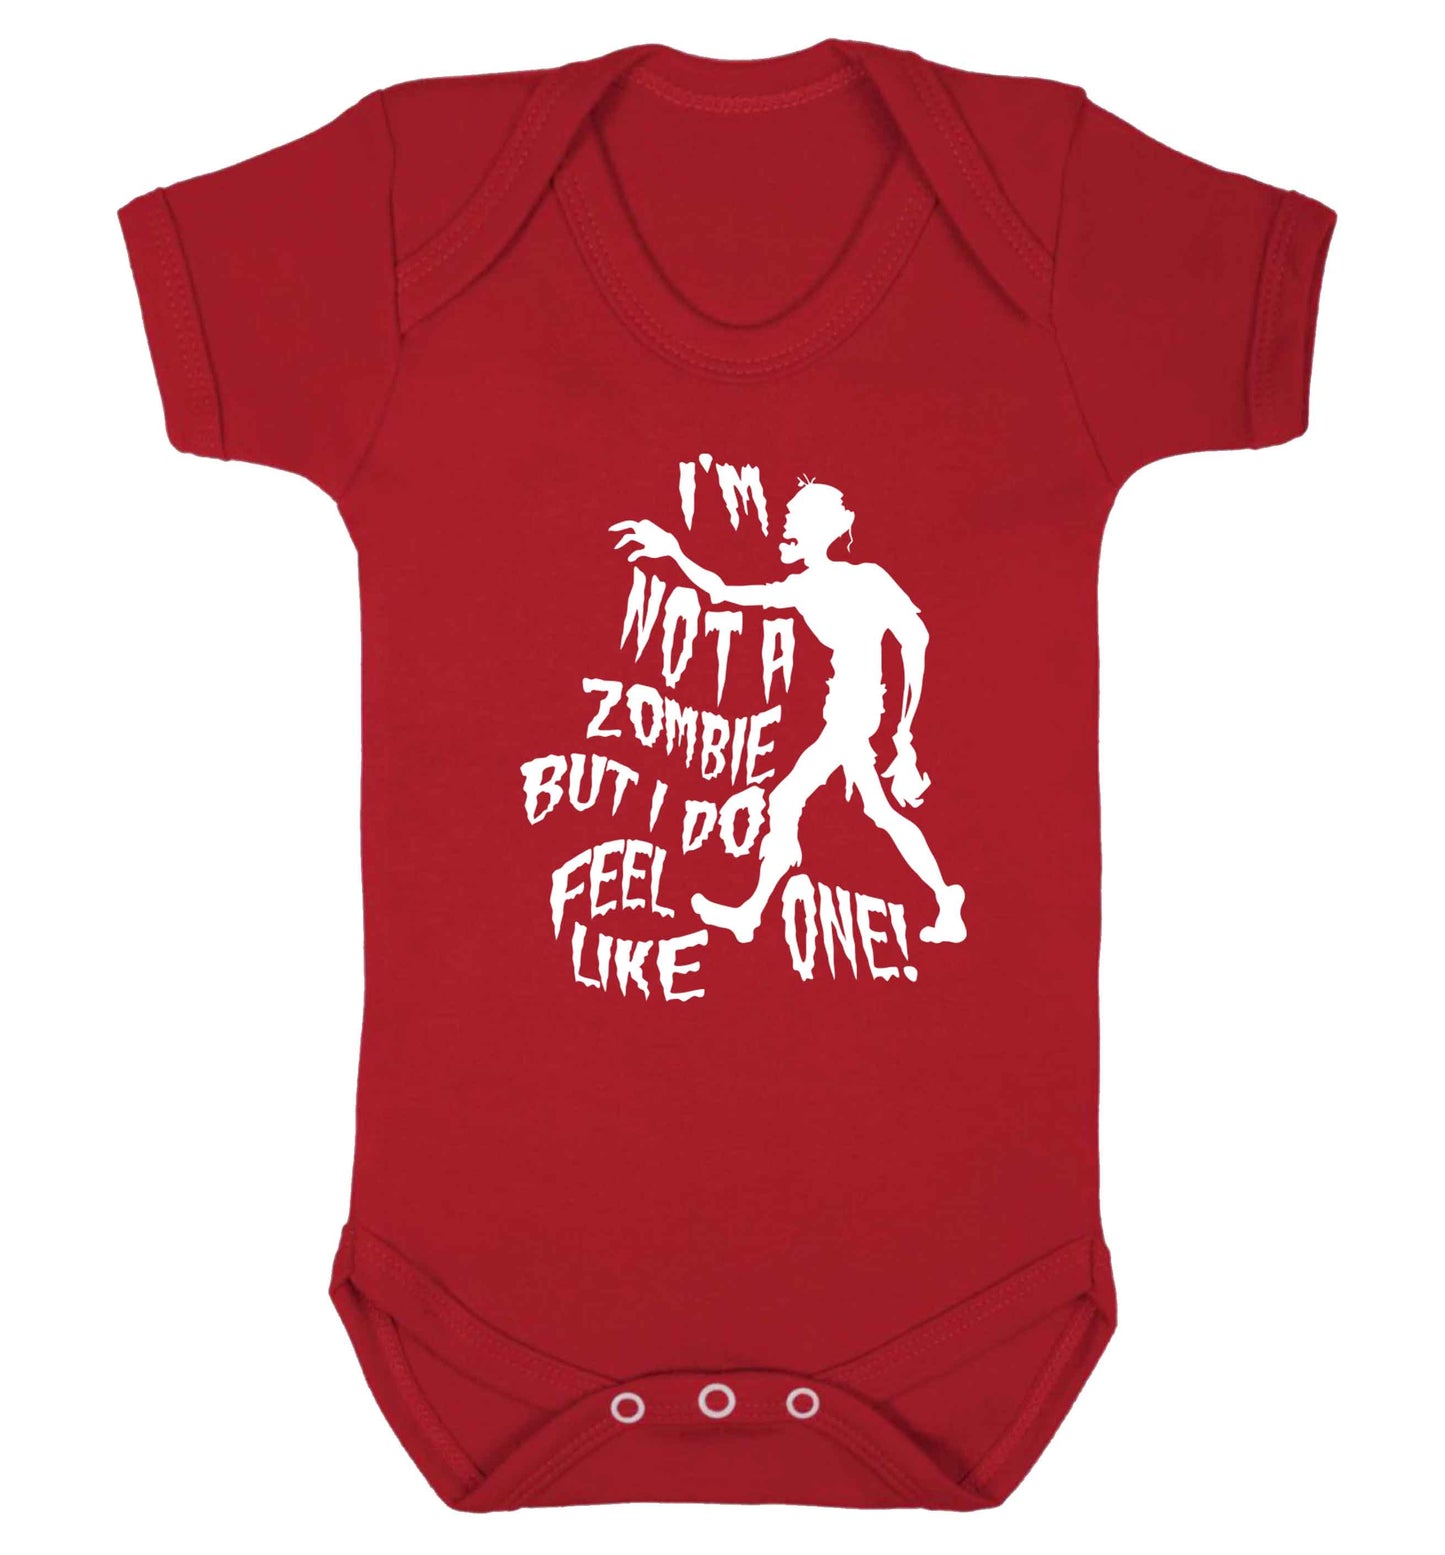 I'm not a zombie but I do feel like one! Baby Vest red 18-24 months